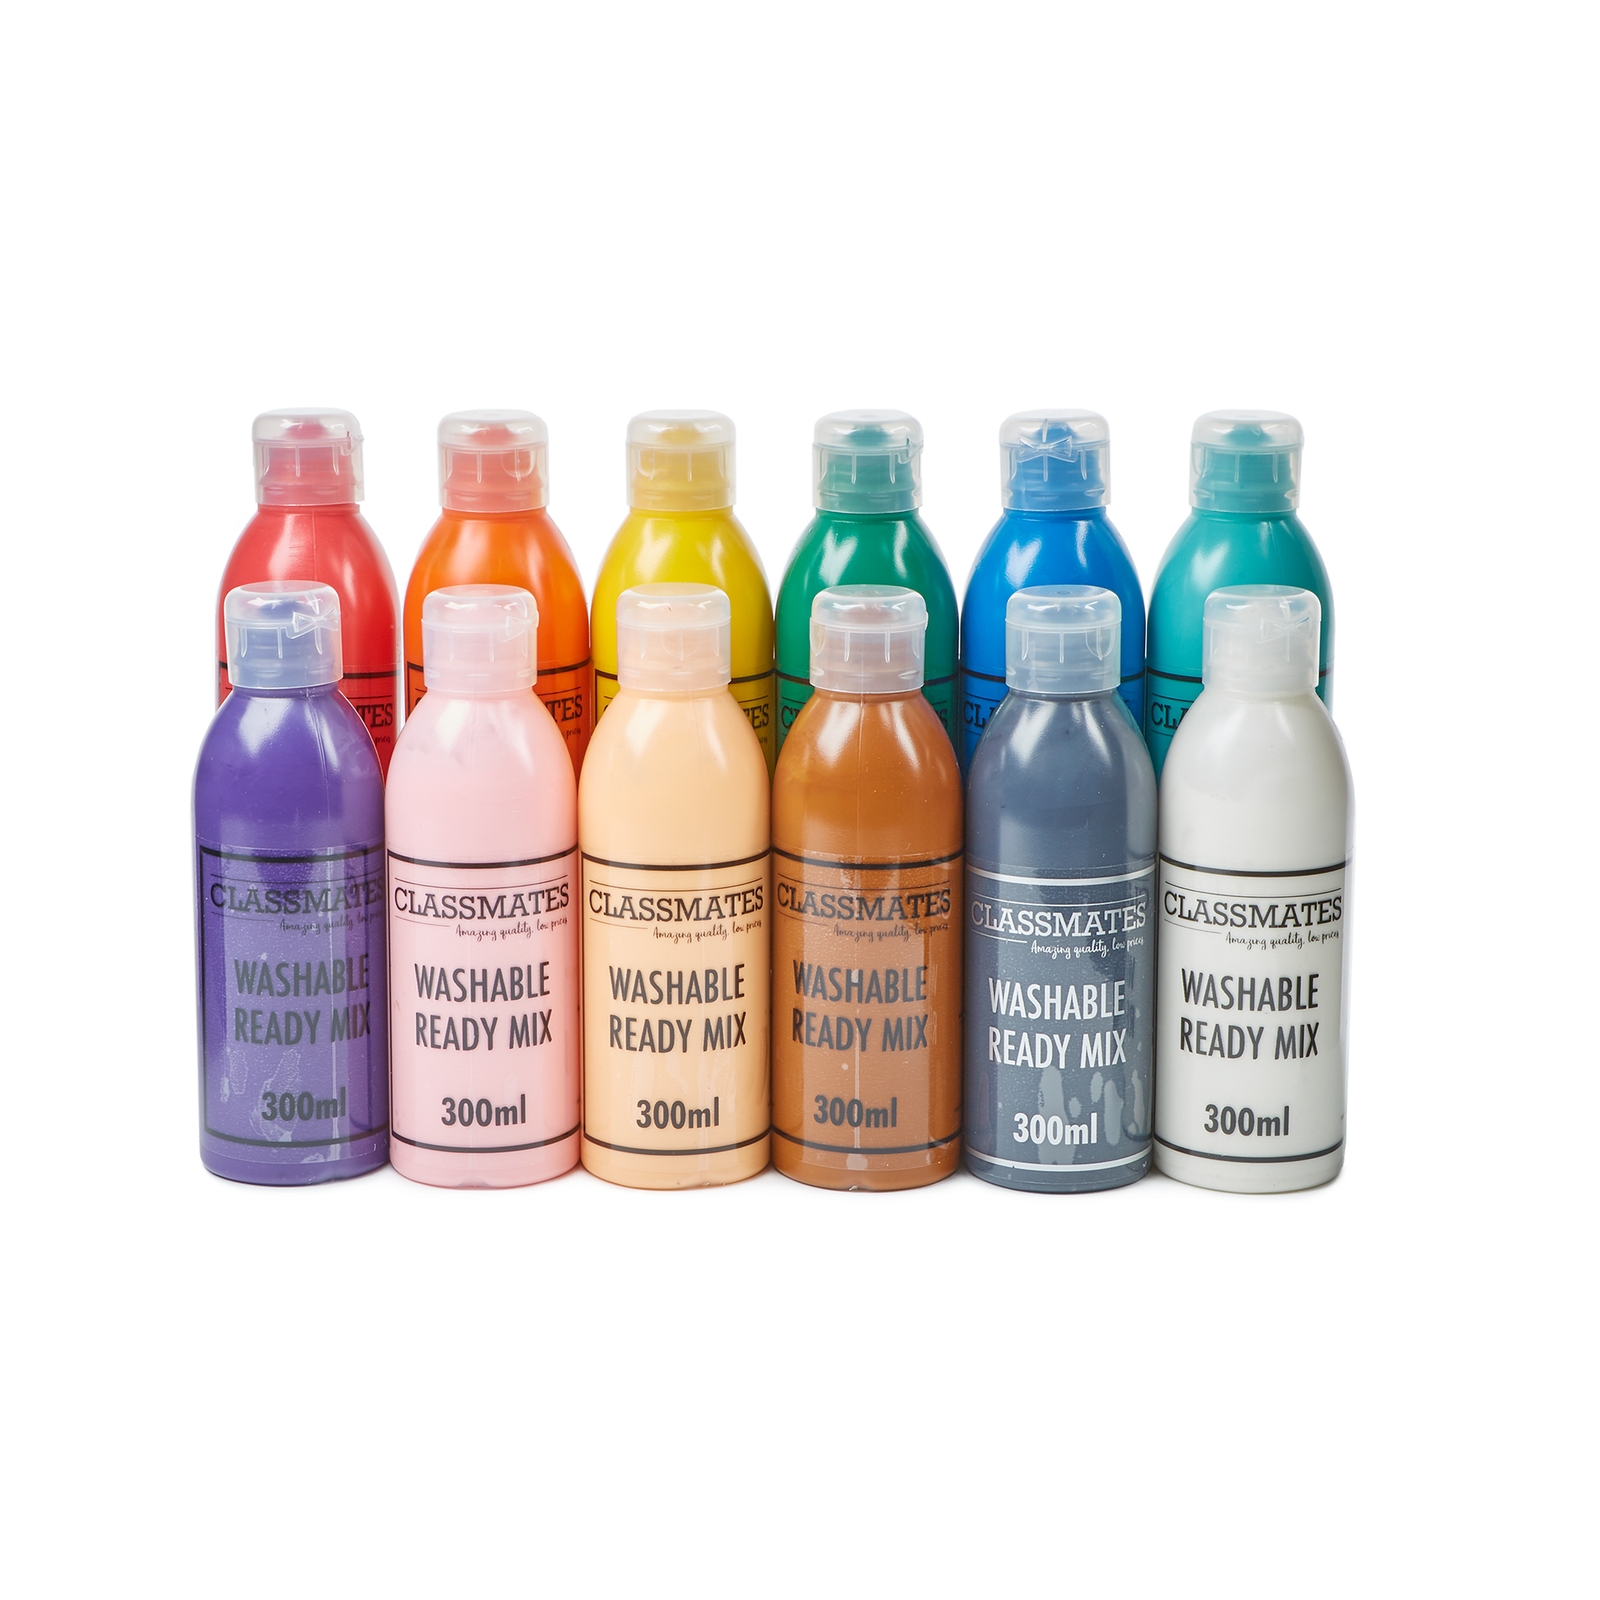 Classmates Washable Ready Mixed Paint in Assorted - Pack of 12 - 300ml Bottle